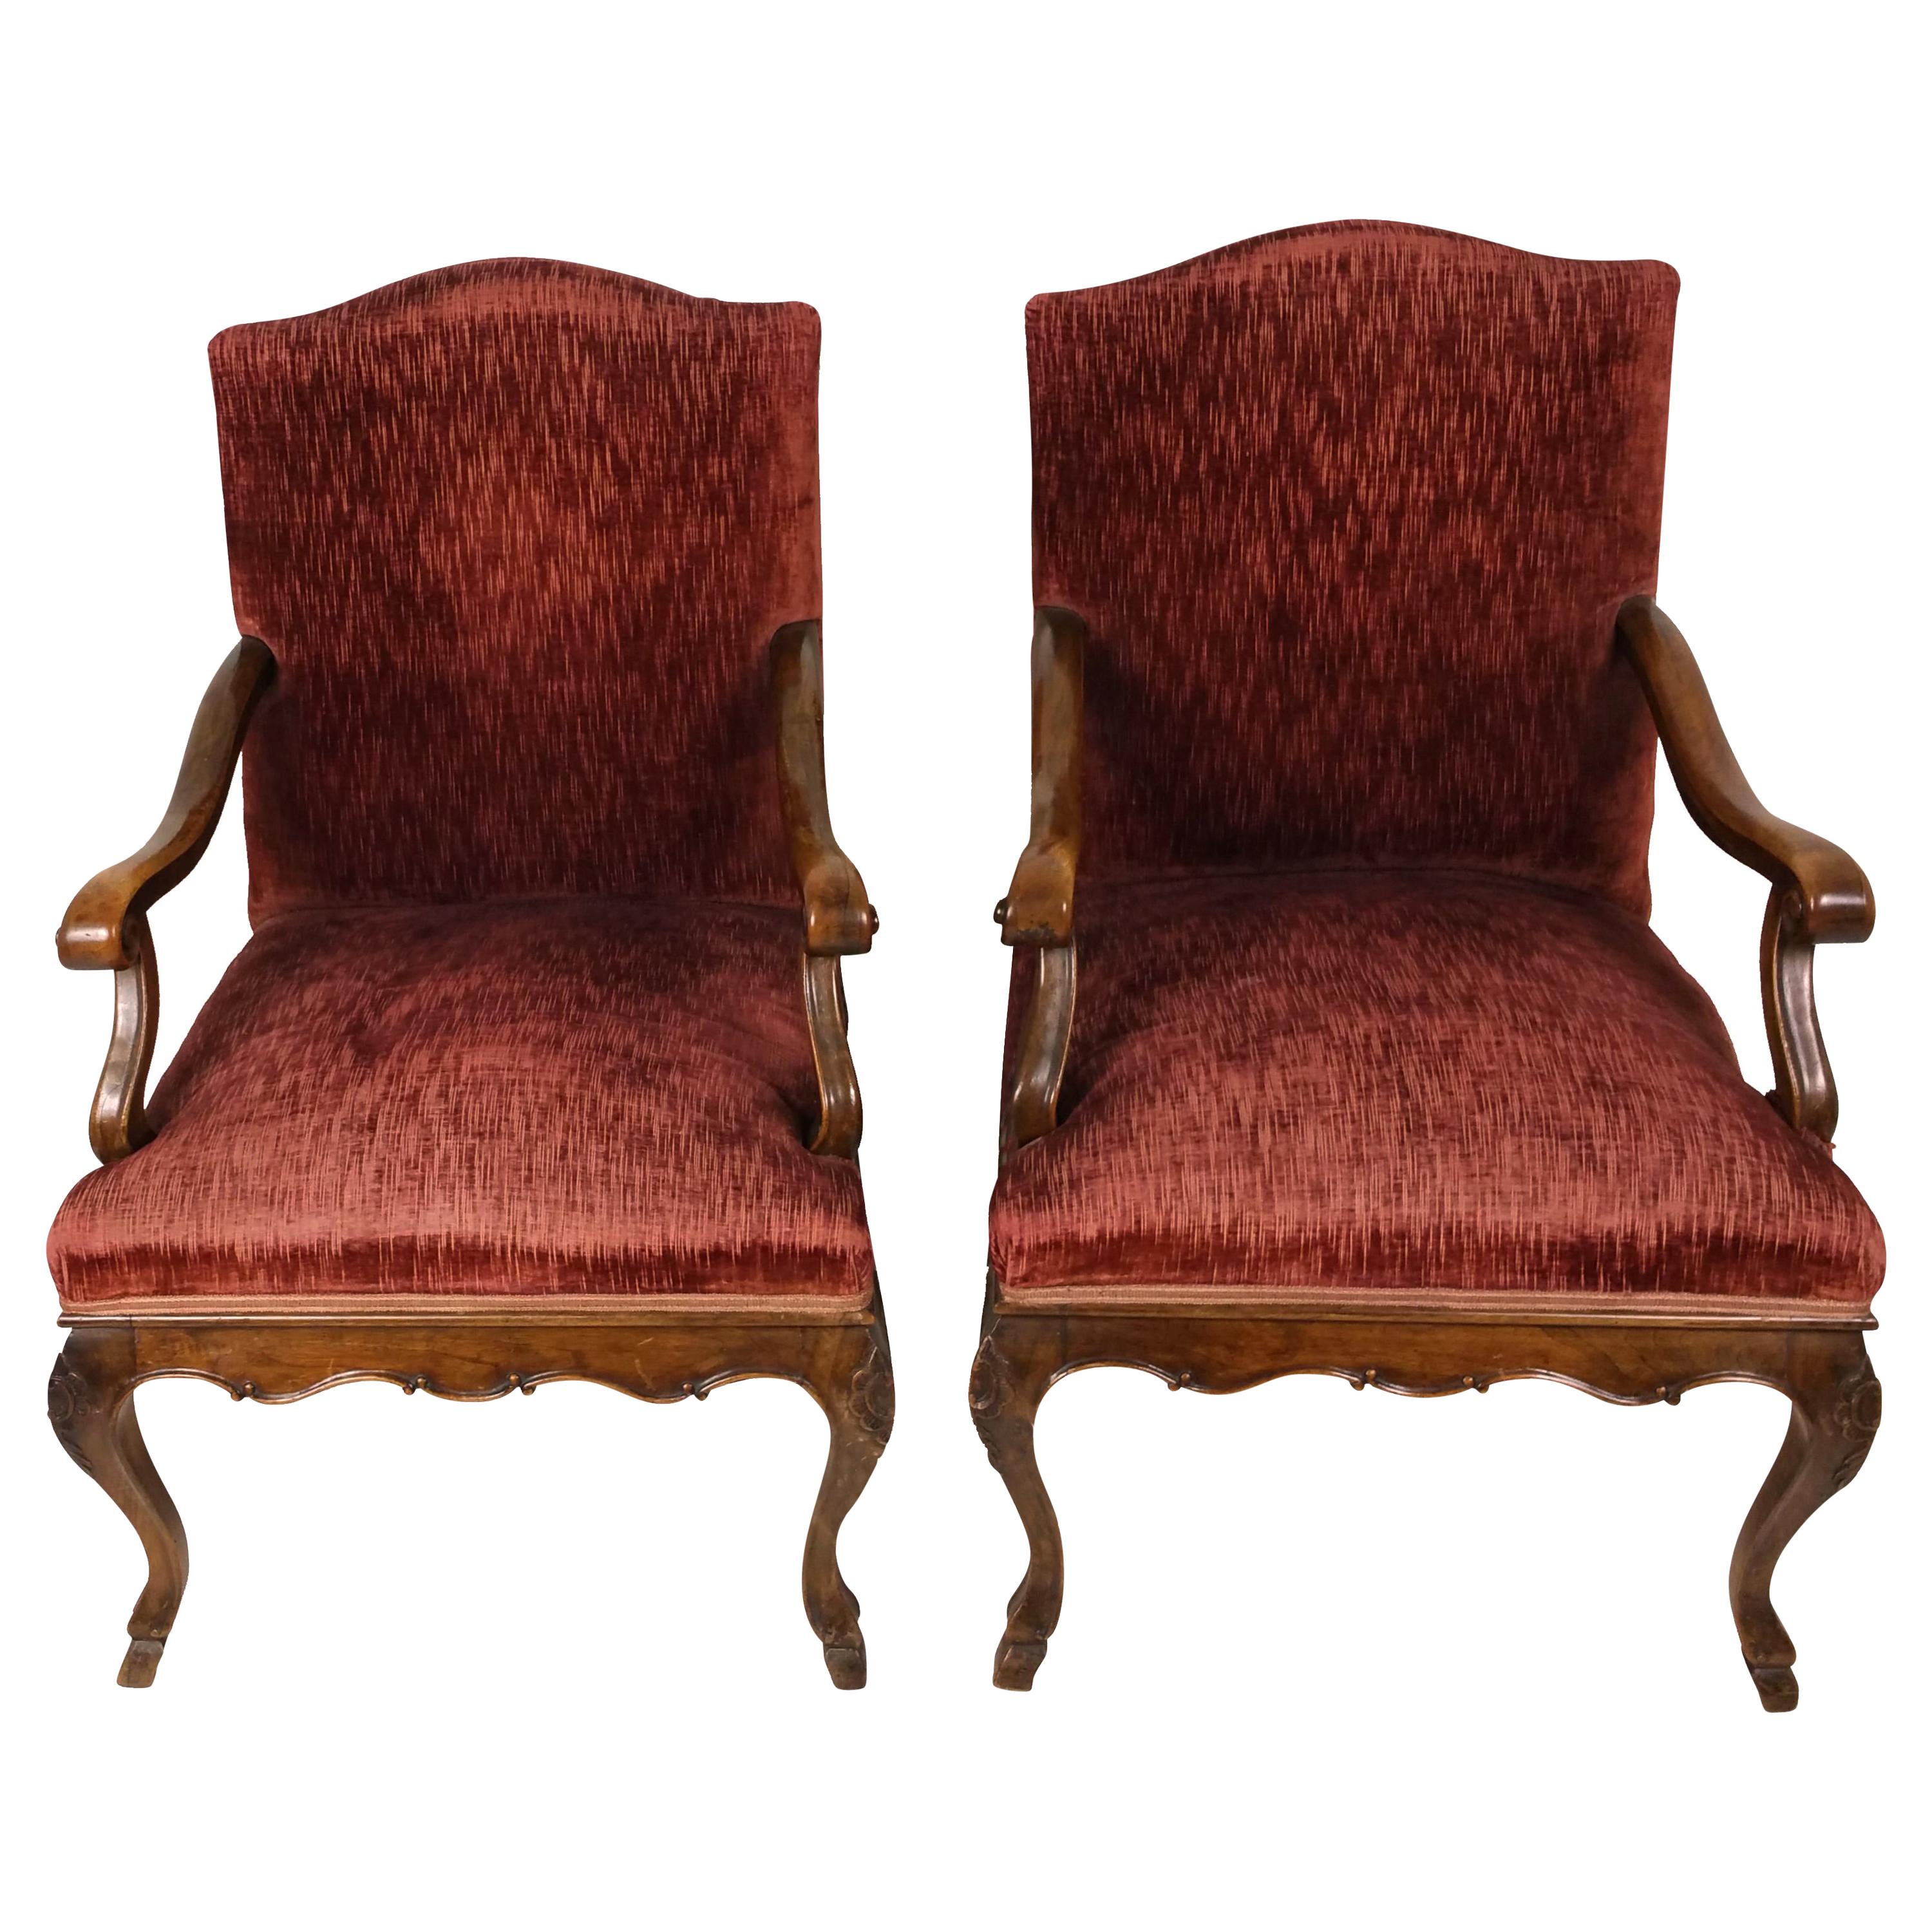 Pair of Large 19th Century French Solid Walnut Upholstered Chairs For Sale 6